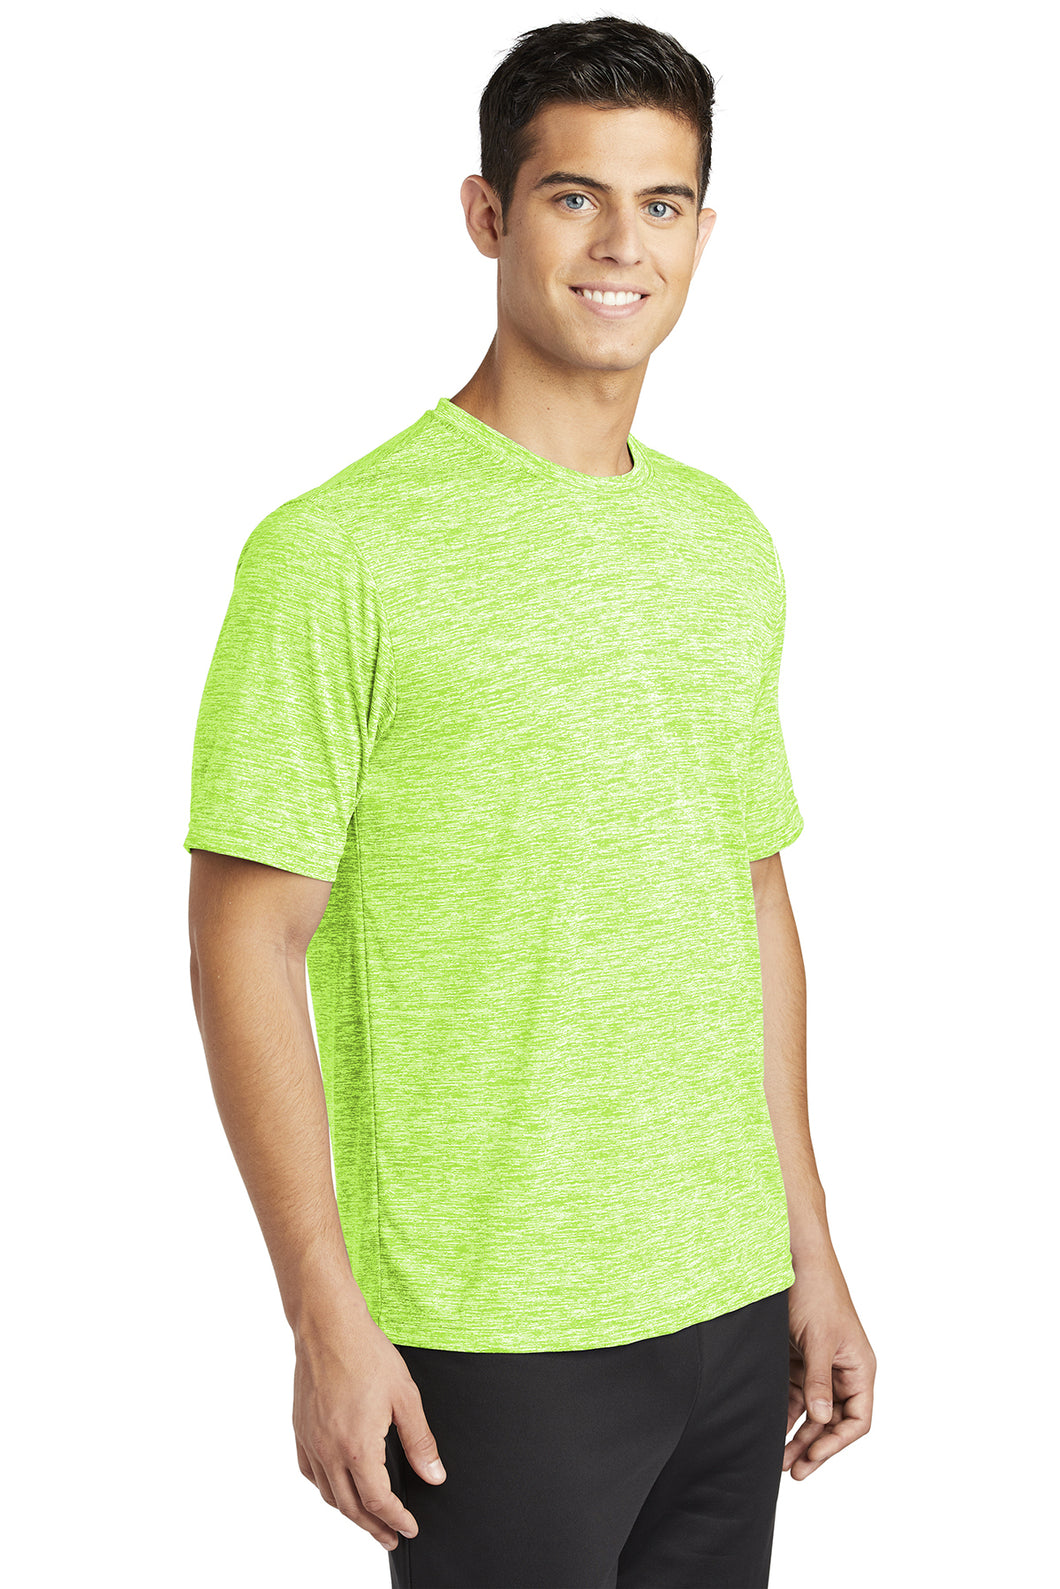 Laser Performance Top - Lime